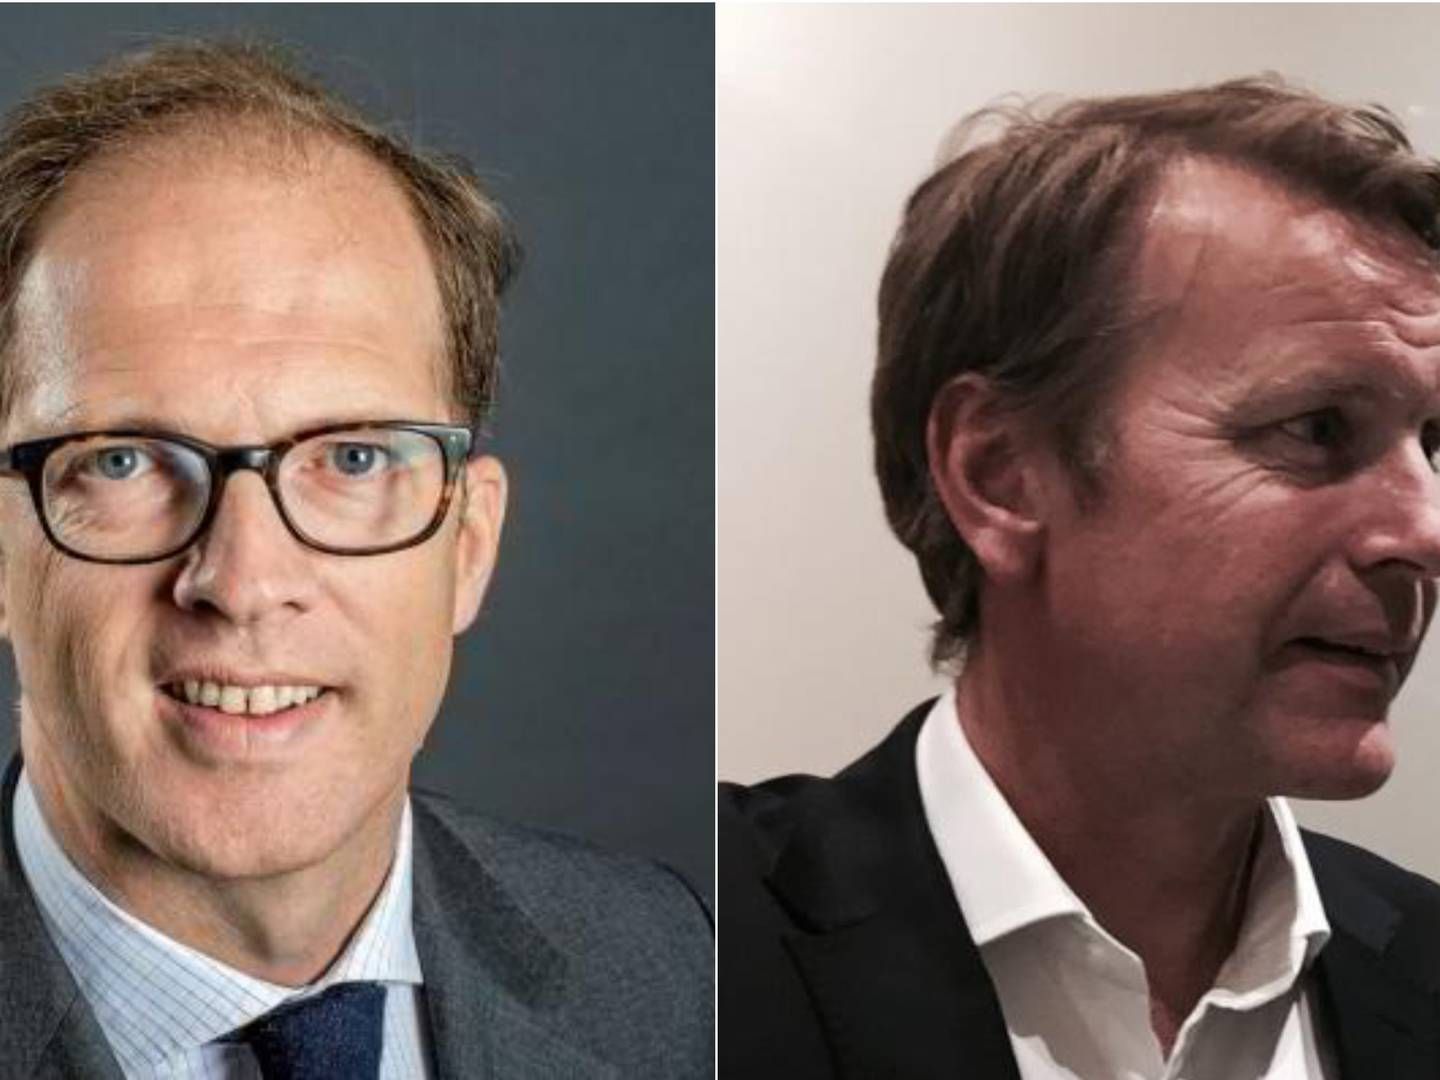 Hugo de Stoop, CEO of Euronav (left), needs to pick up the pieces following terminated Frontline merger. Frontline CEO Lars H. Barstad will carry on as chief exec. | Photo: Euronav / Frontline